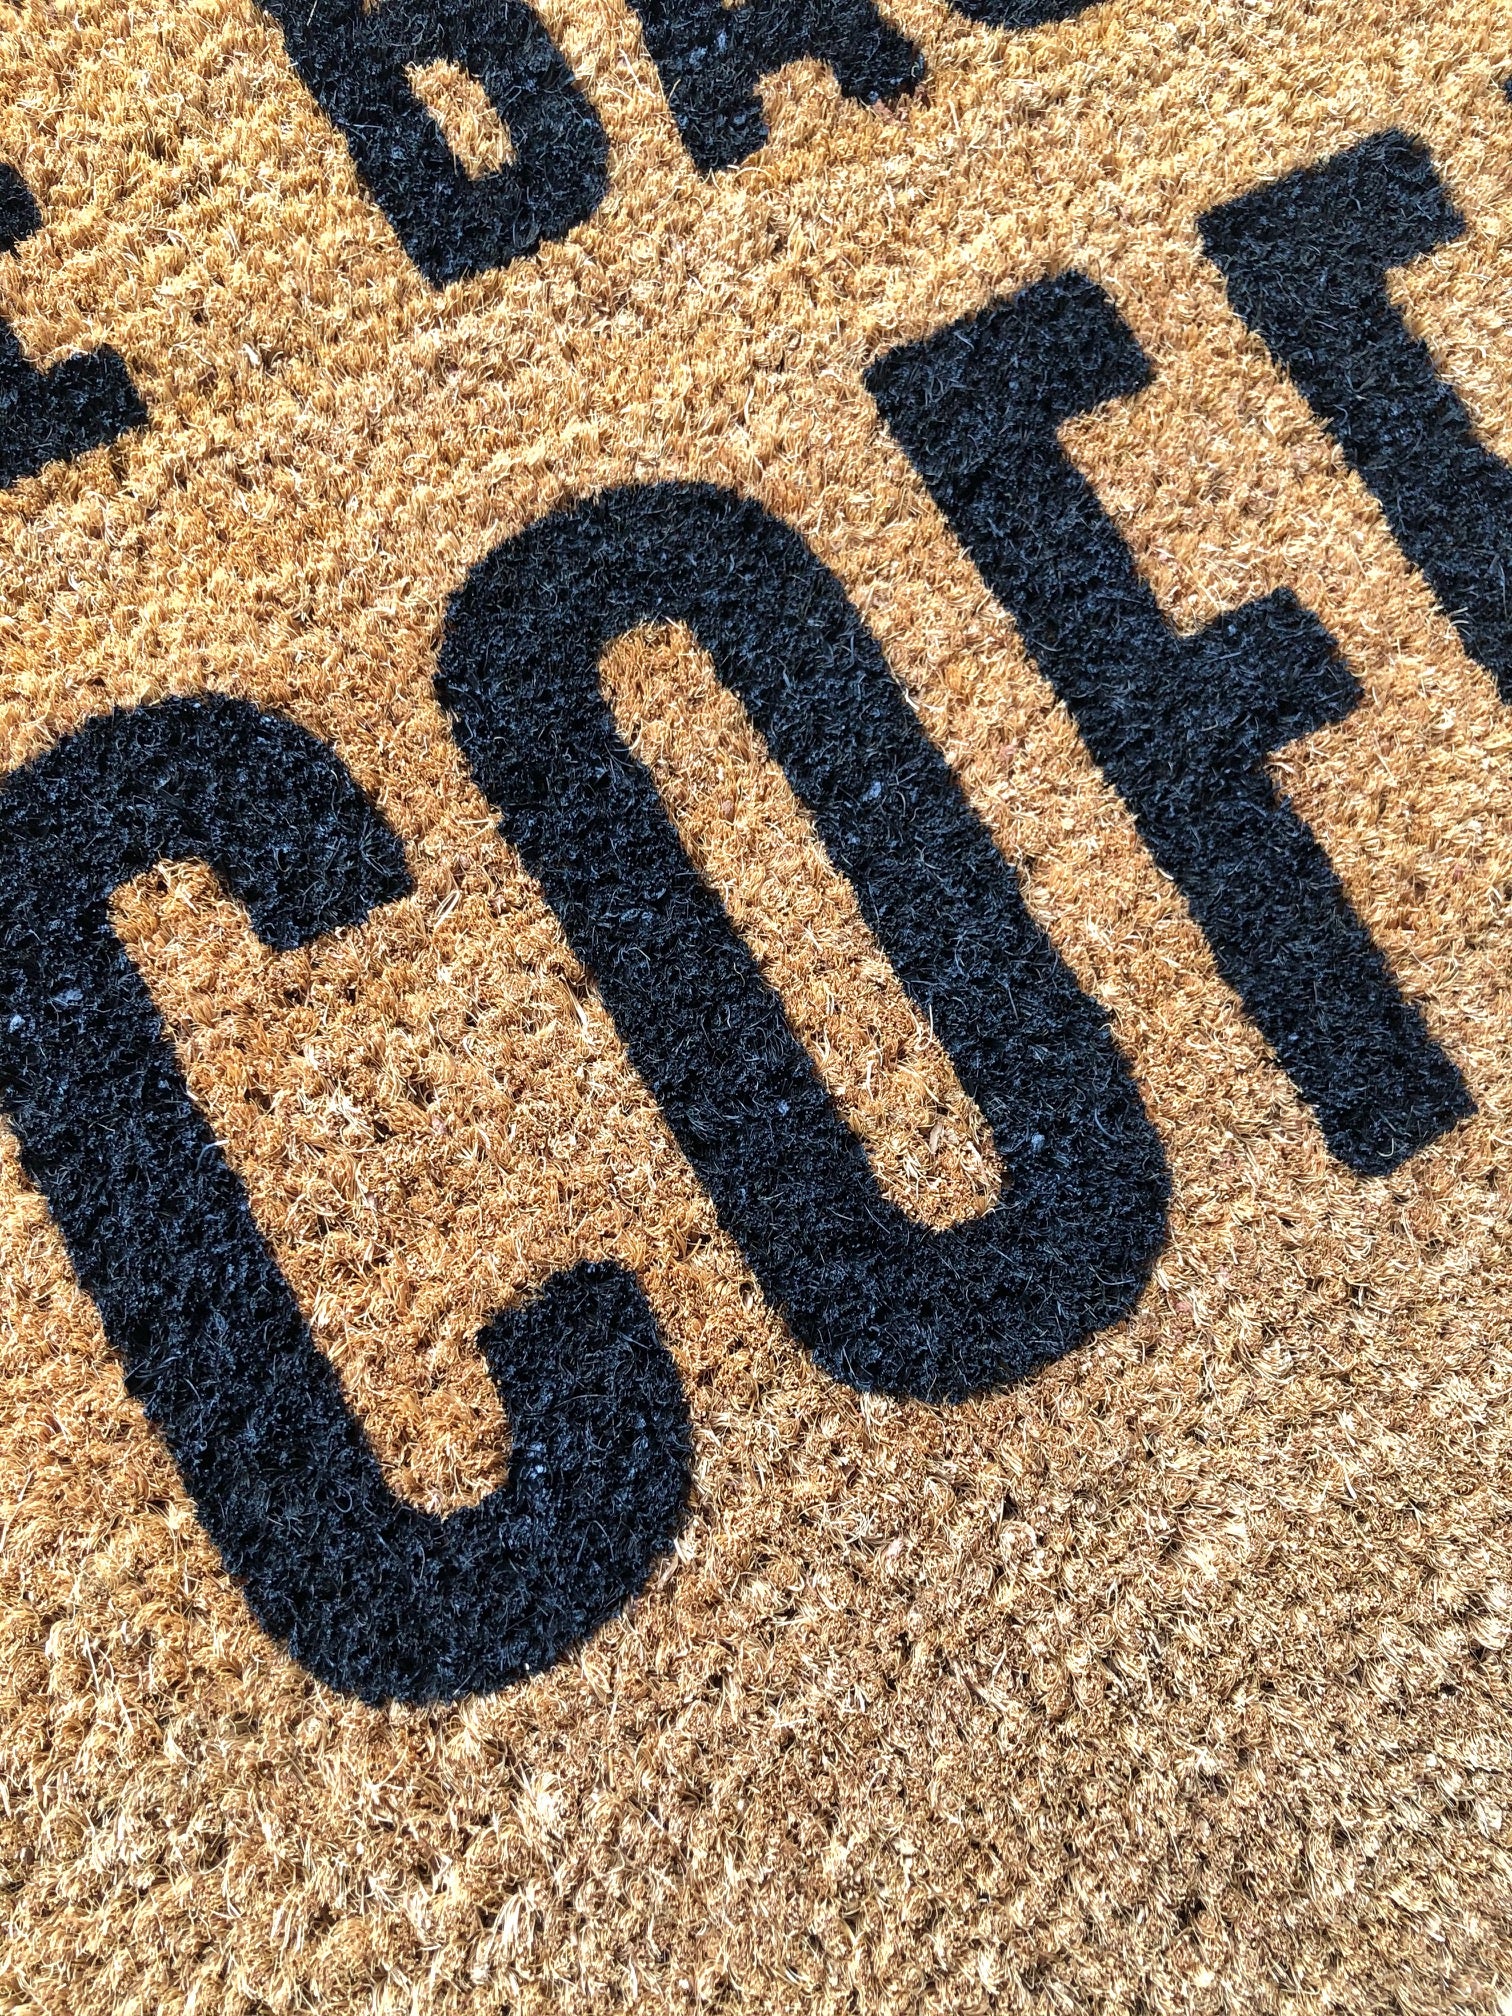 Come Back With Coffee Doormat